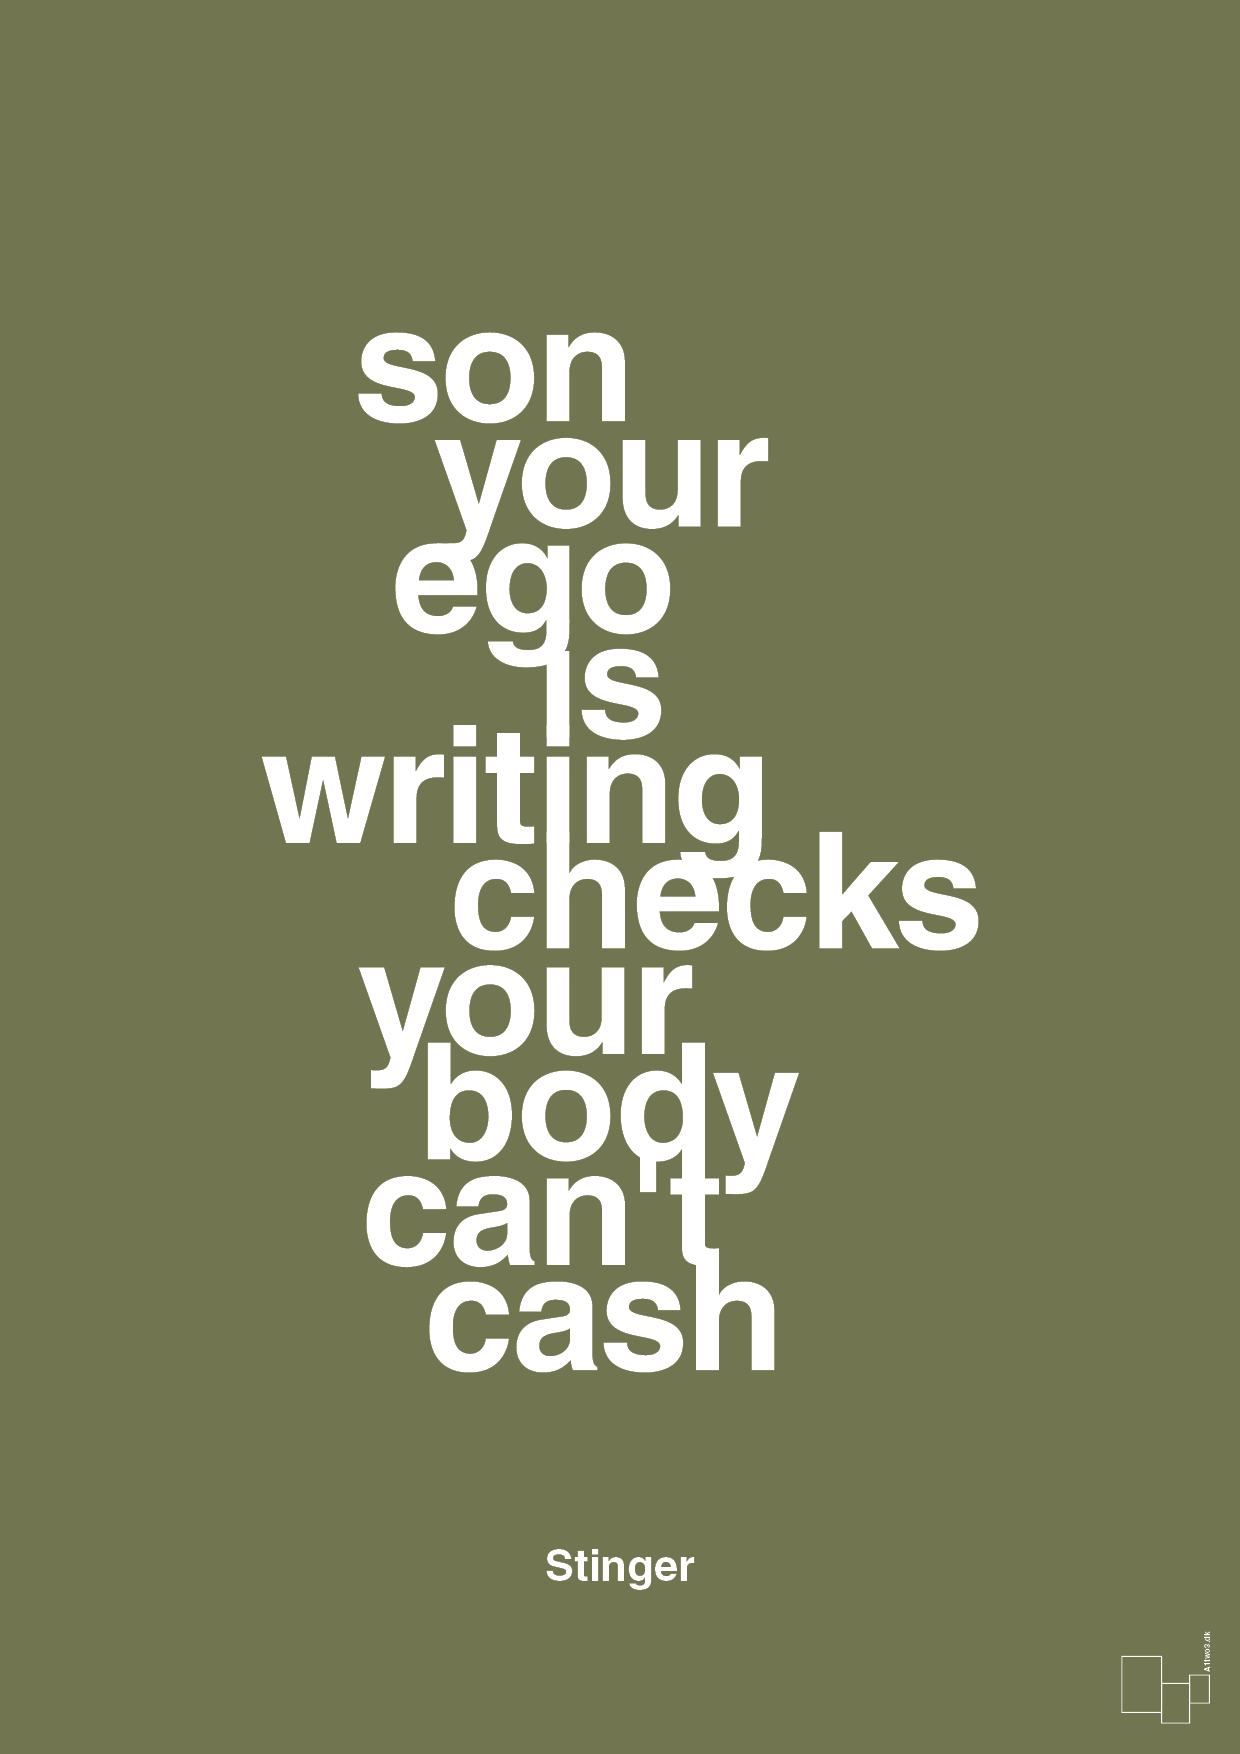 son your ego is writing checks your body can't cash - Plakat med Citater i Secret Meadow